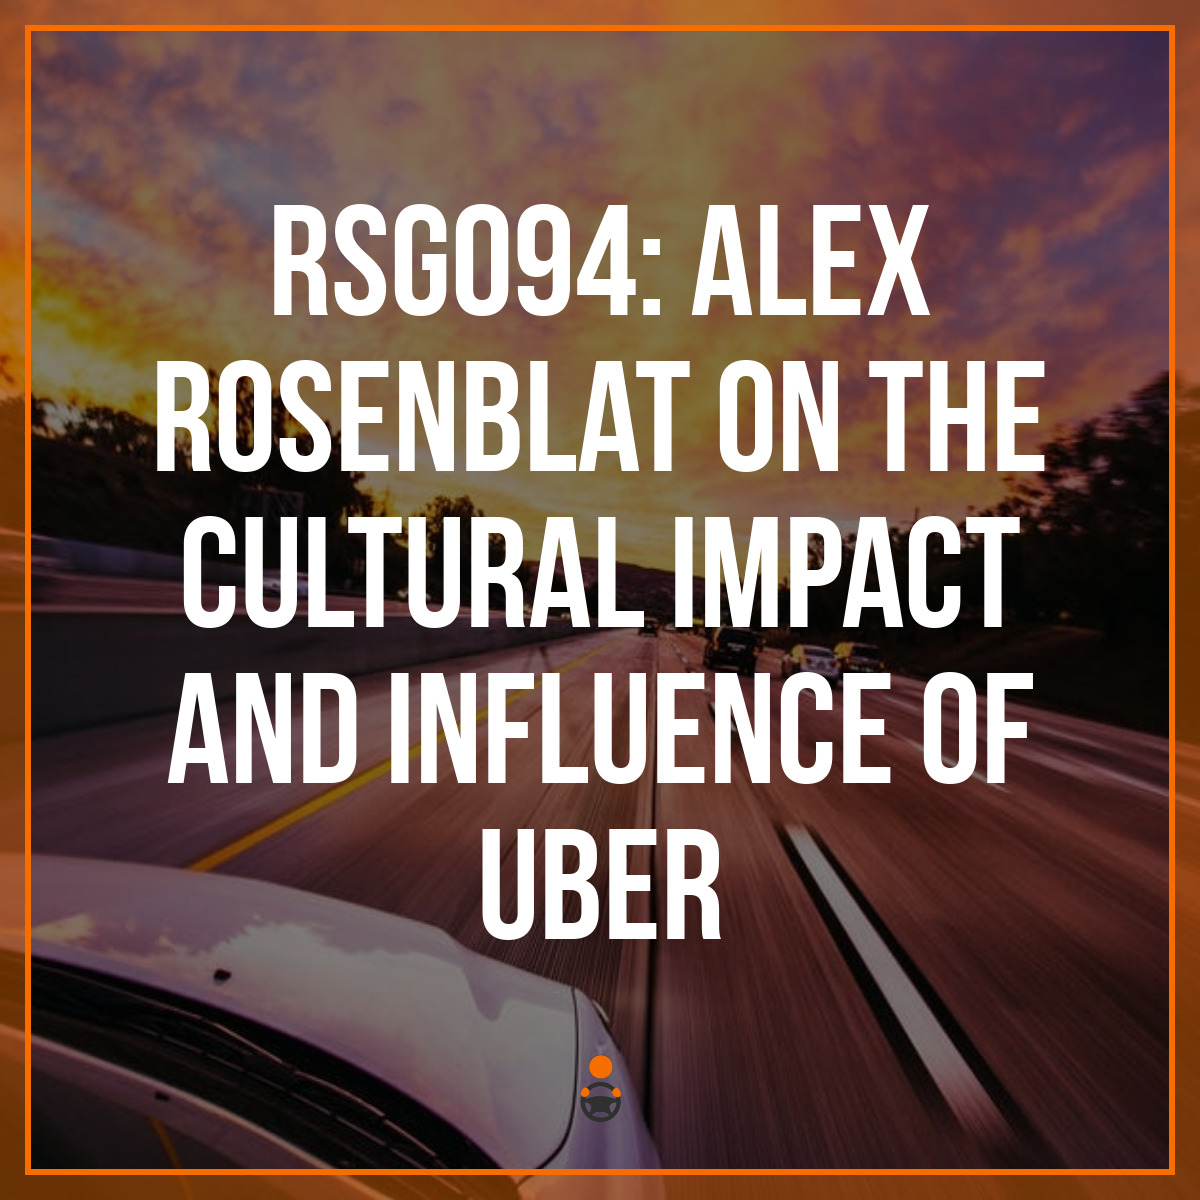 RSG094: Alex Rosenblat on the cultural impact and influence of Uber